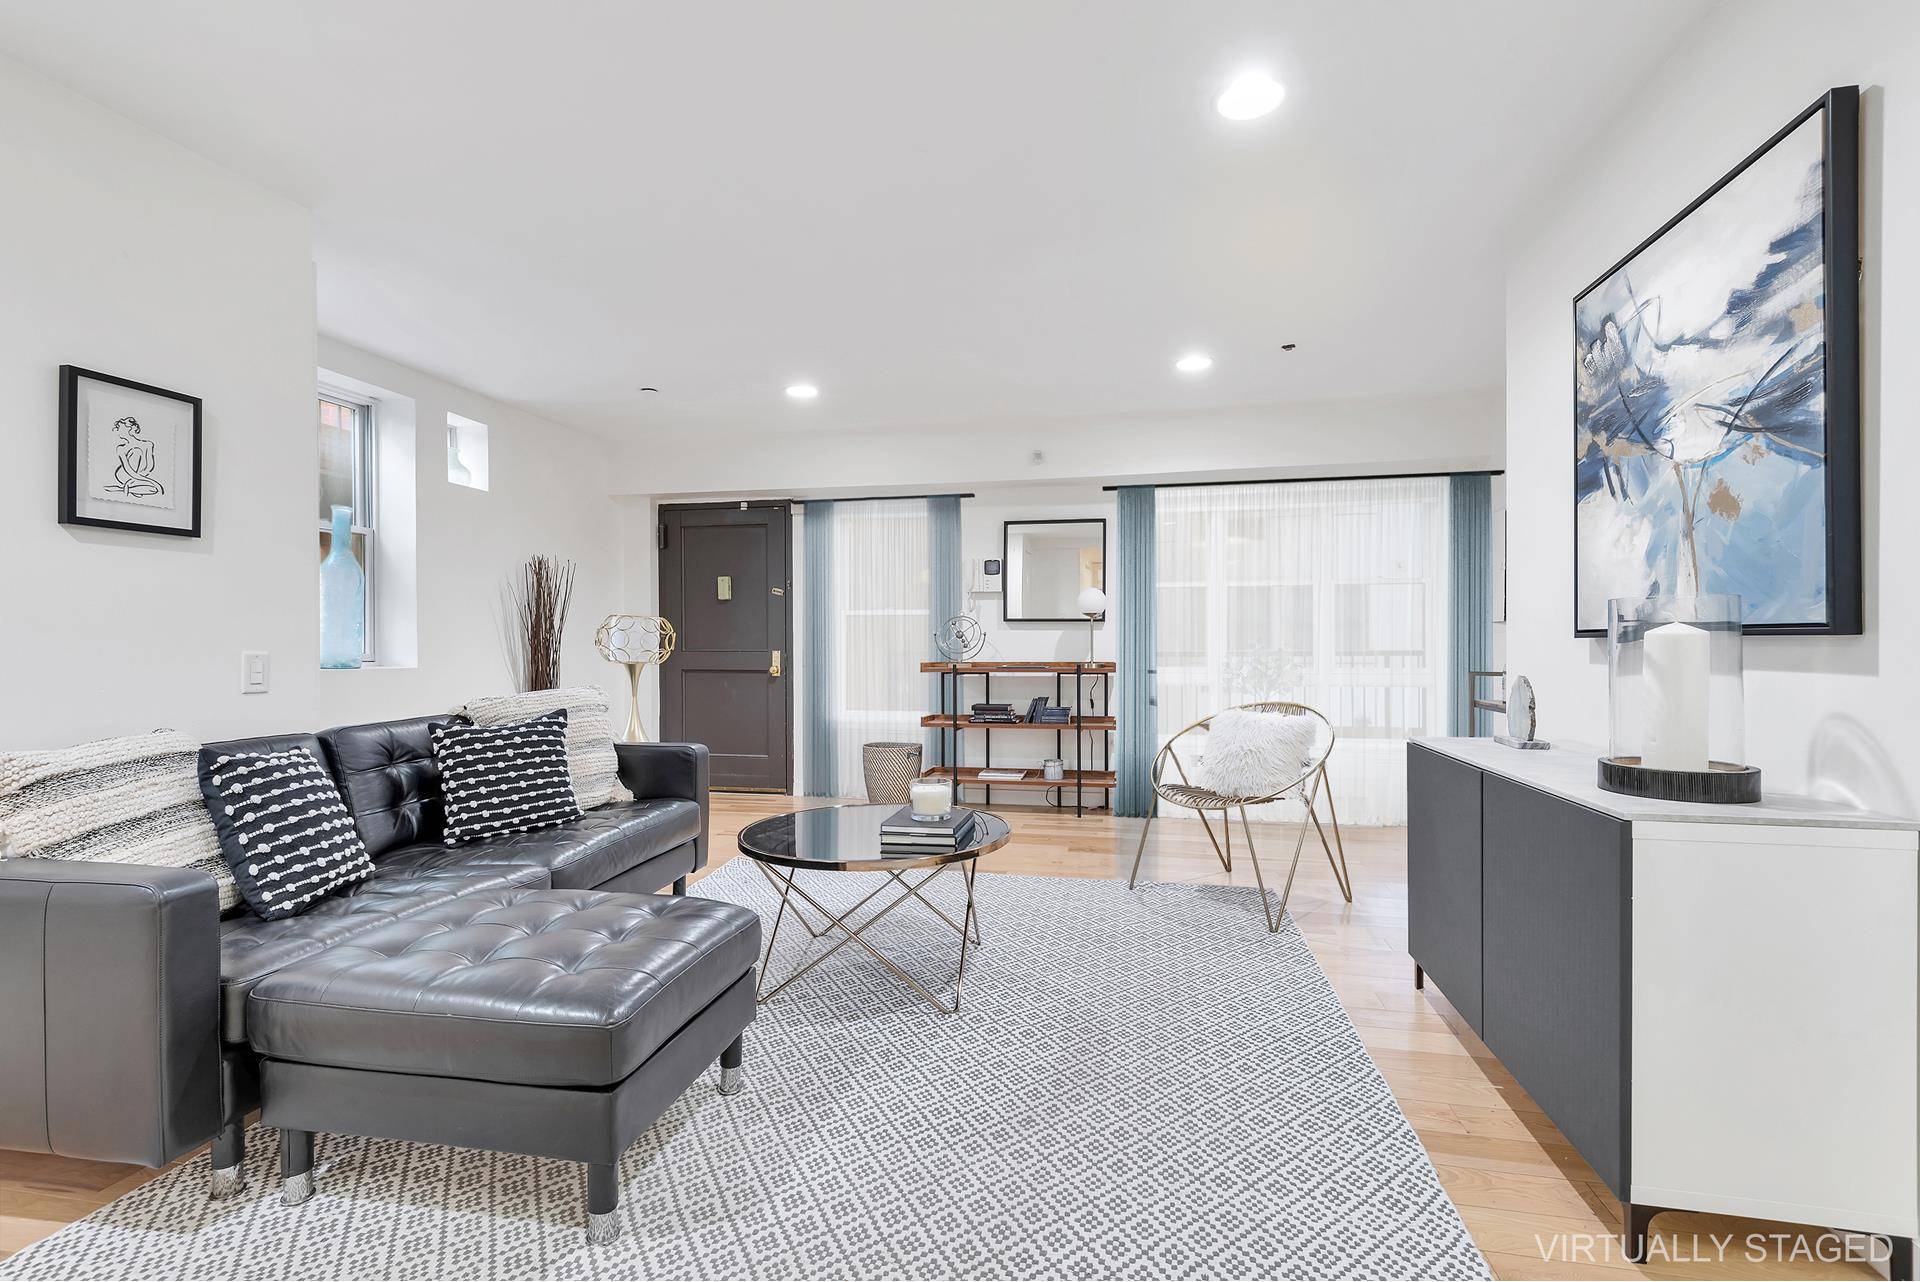 Fabulous duplex on one of the most desirable streets in Prospect Heights.